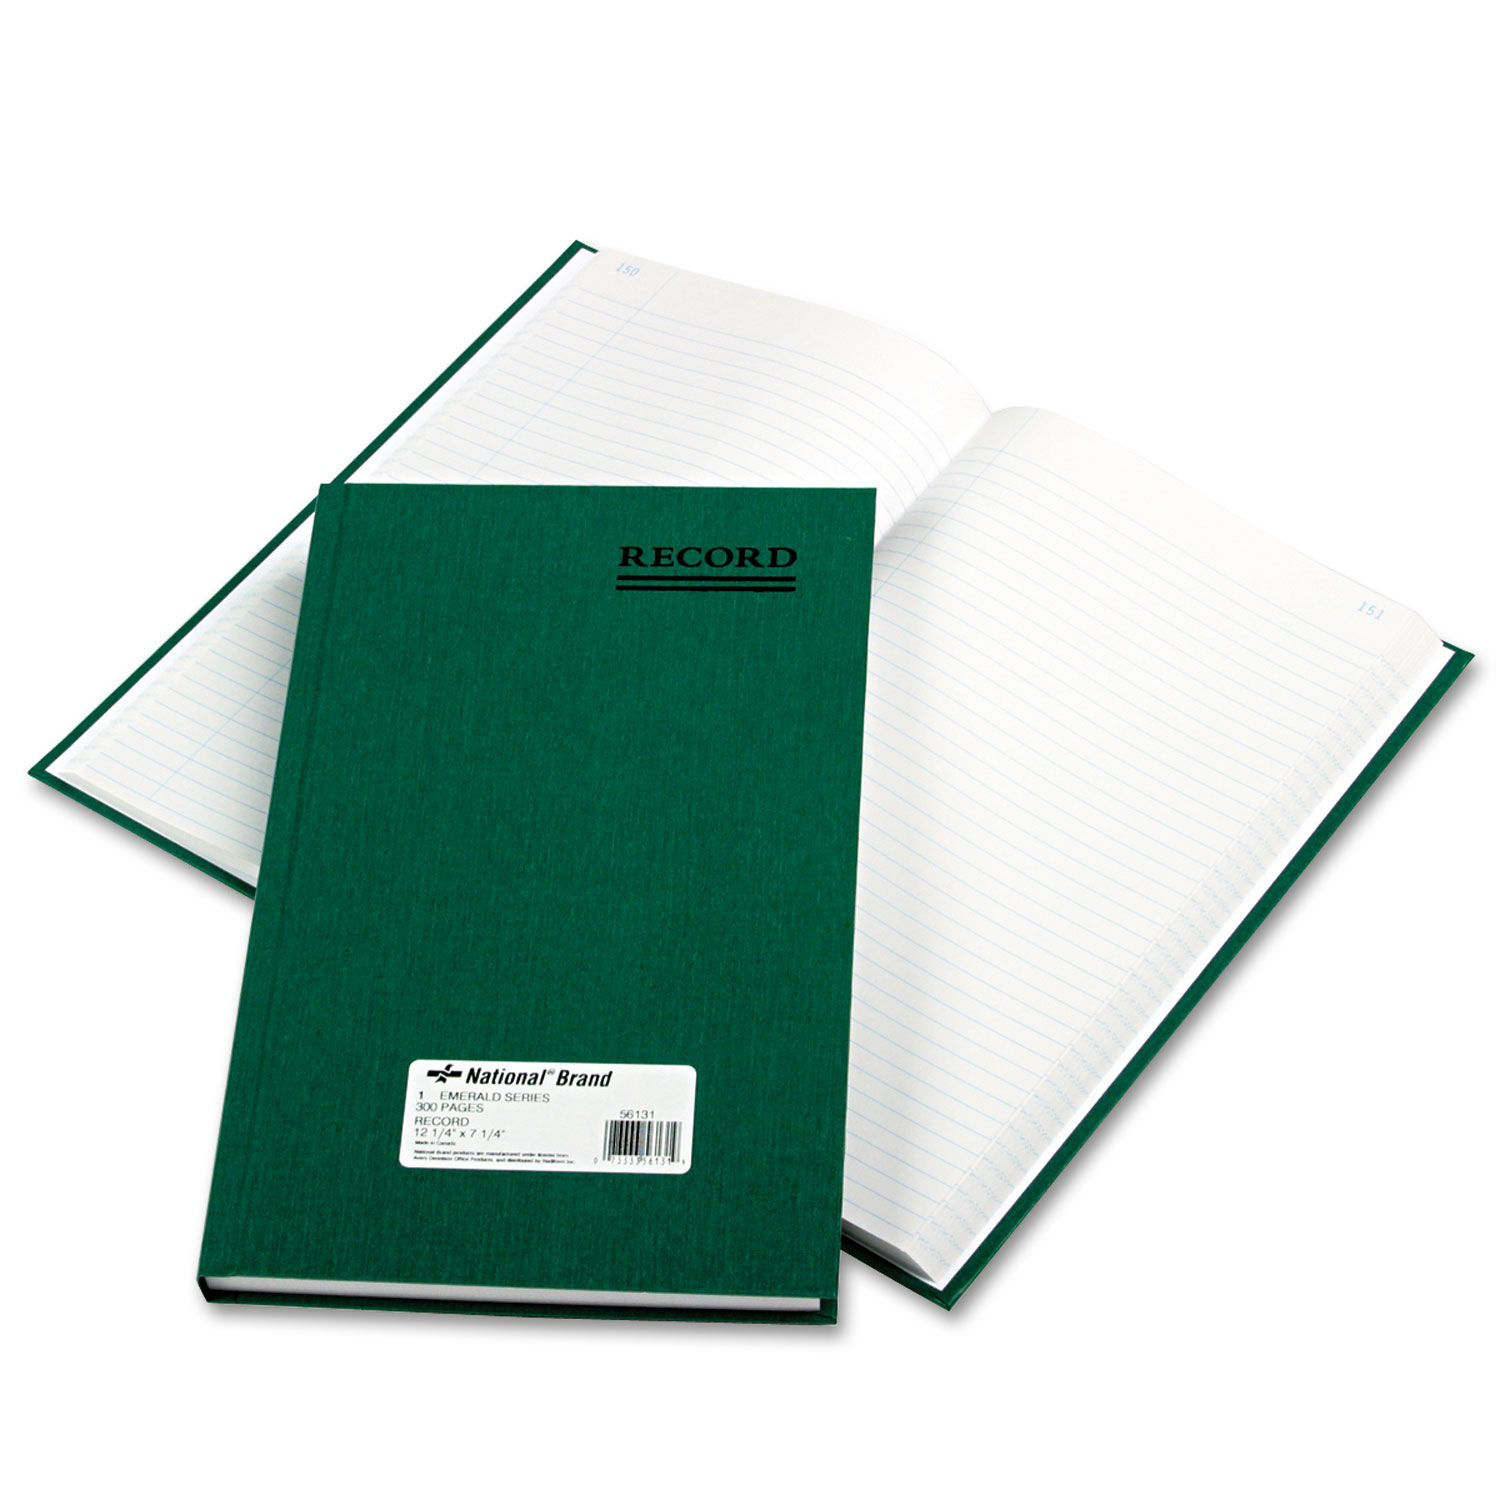  National 56131 Emerald Series Account Book, Green Cover, 300 Pages, 12 1/4 x 7 1/4 (RED56131) 